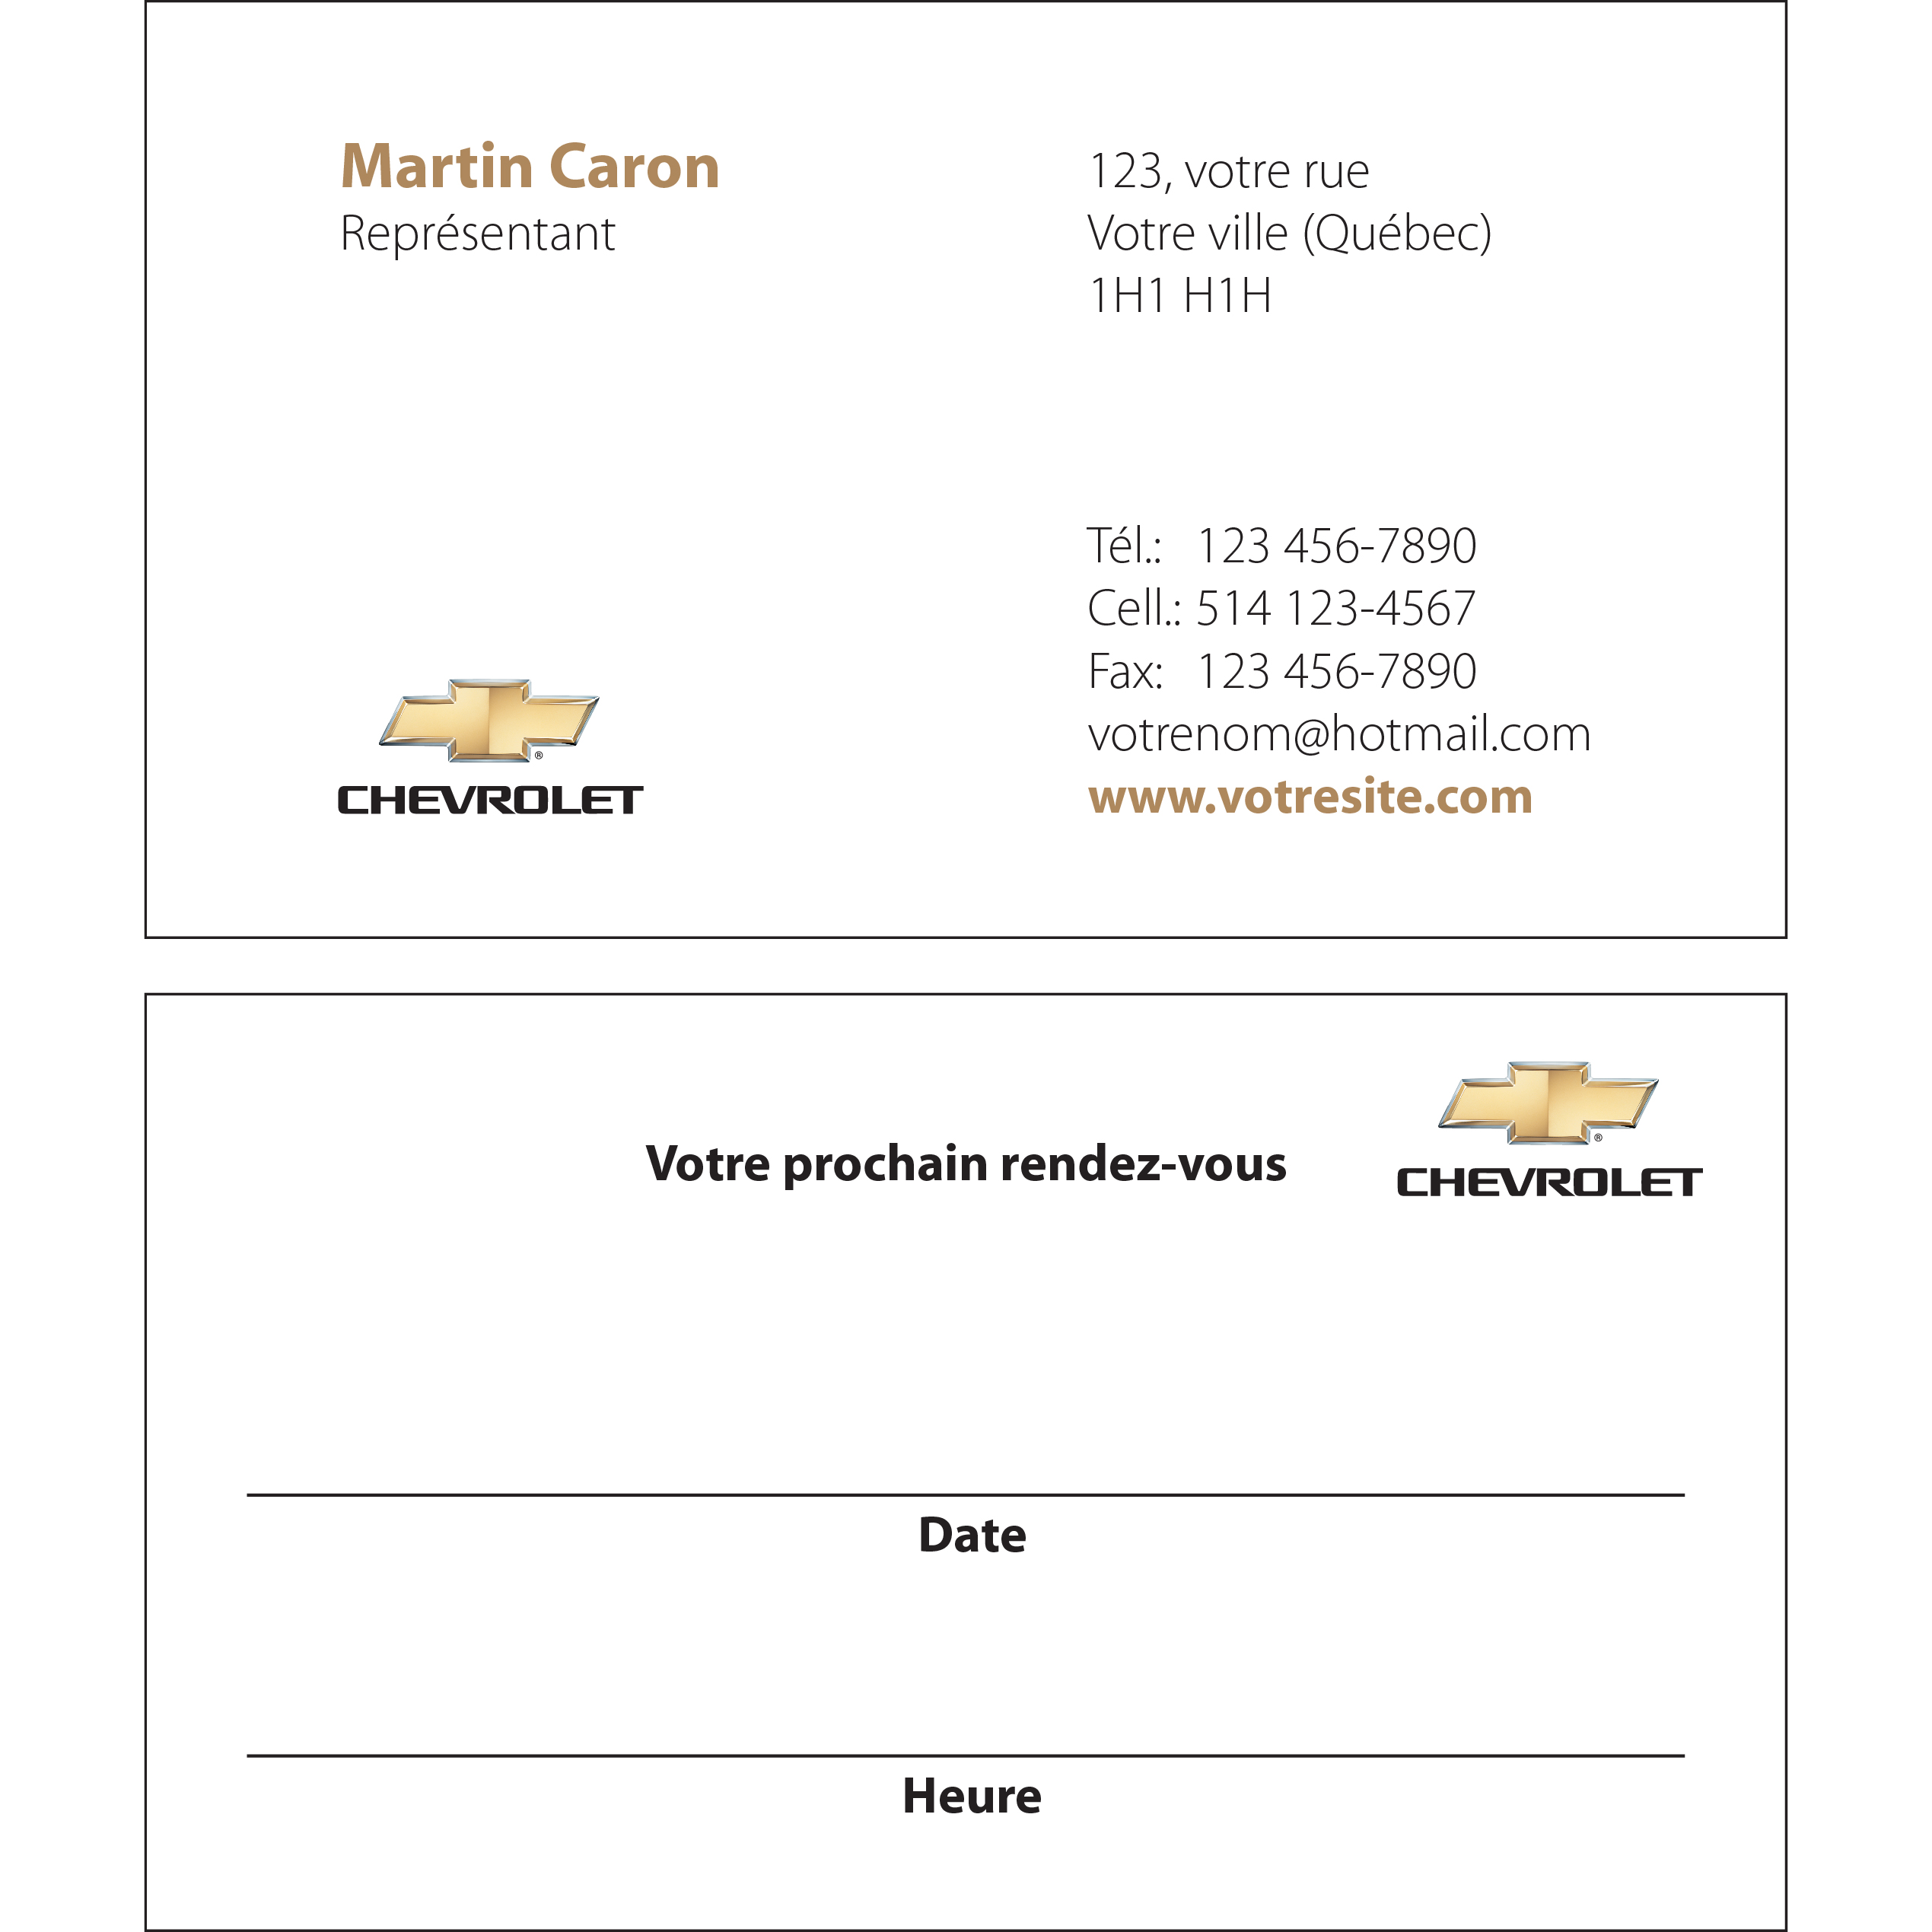 Chevrolet Business cards - 2 sides, BCCH04